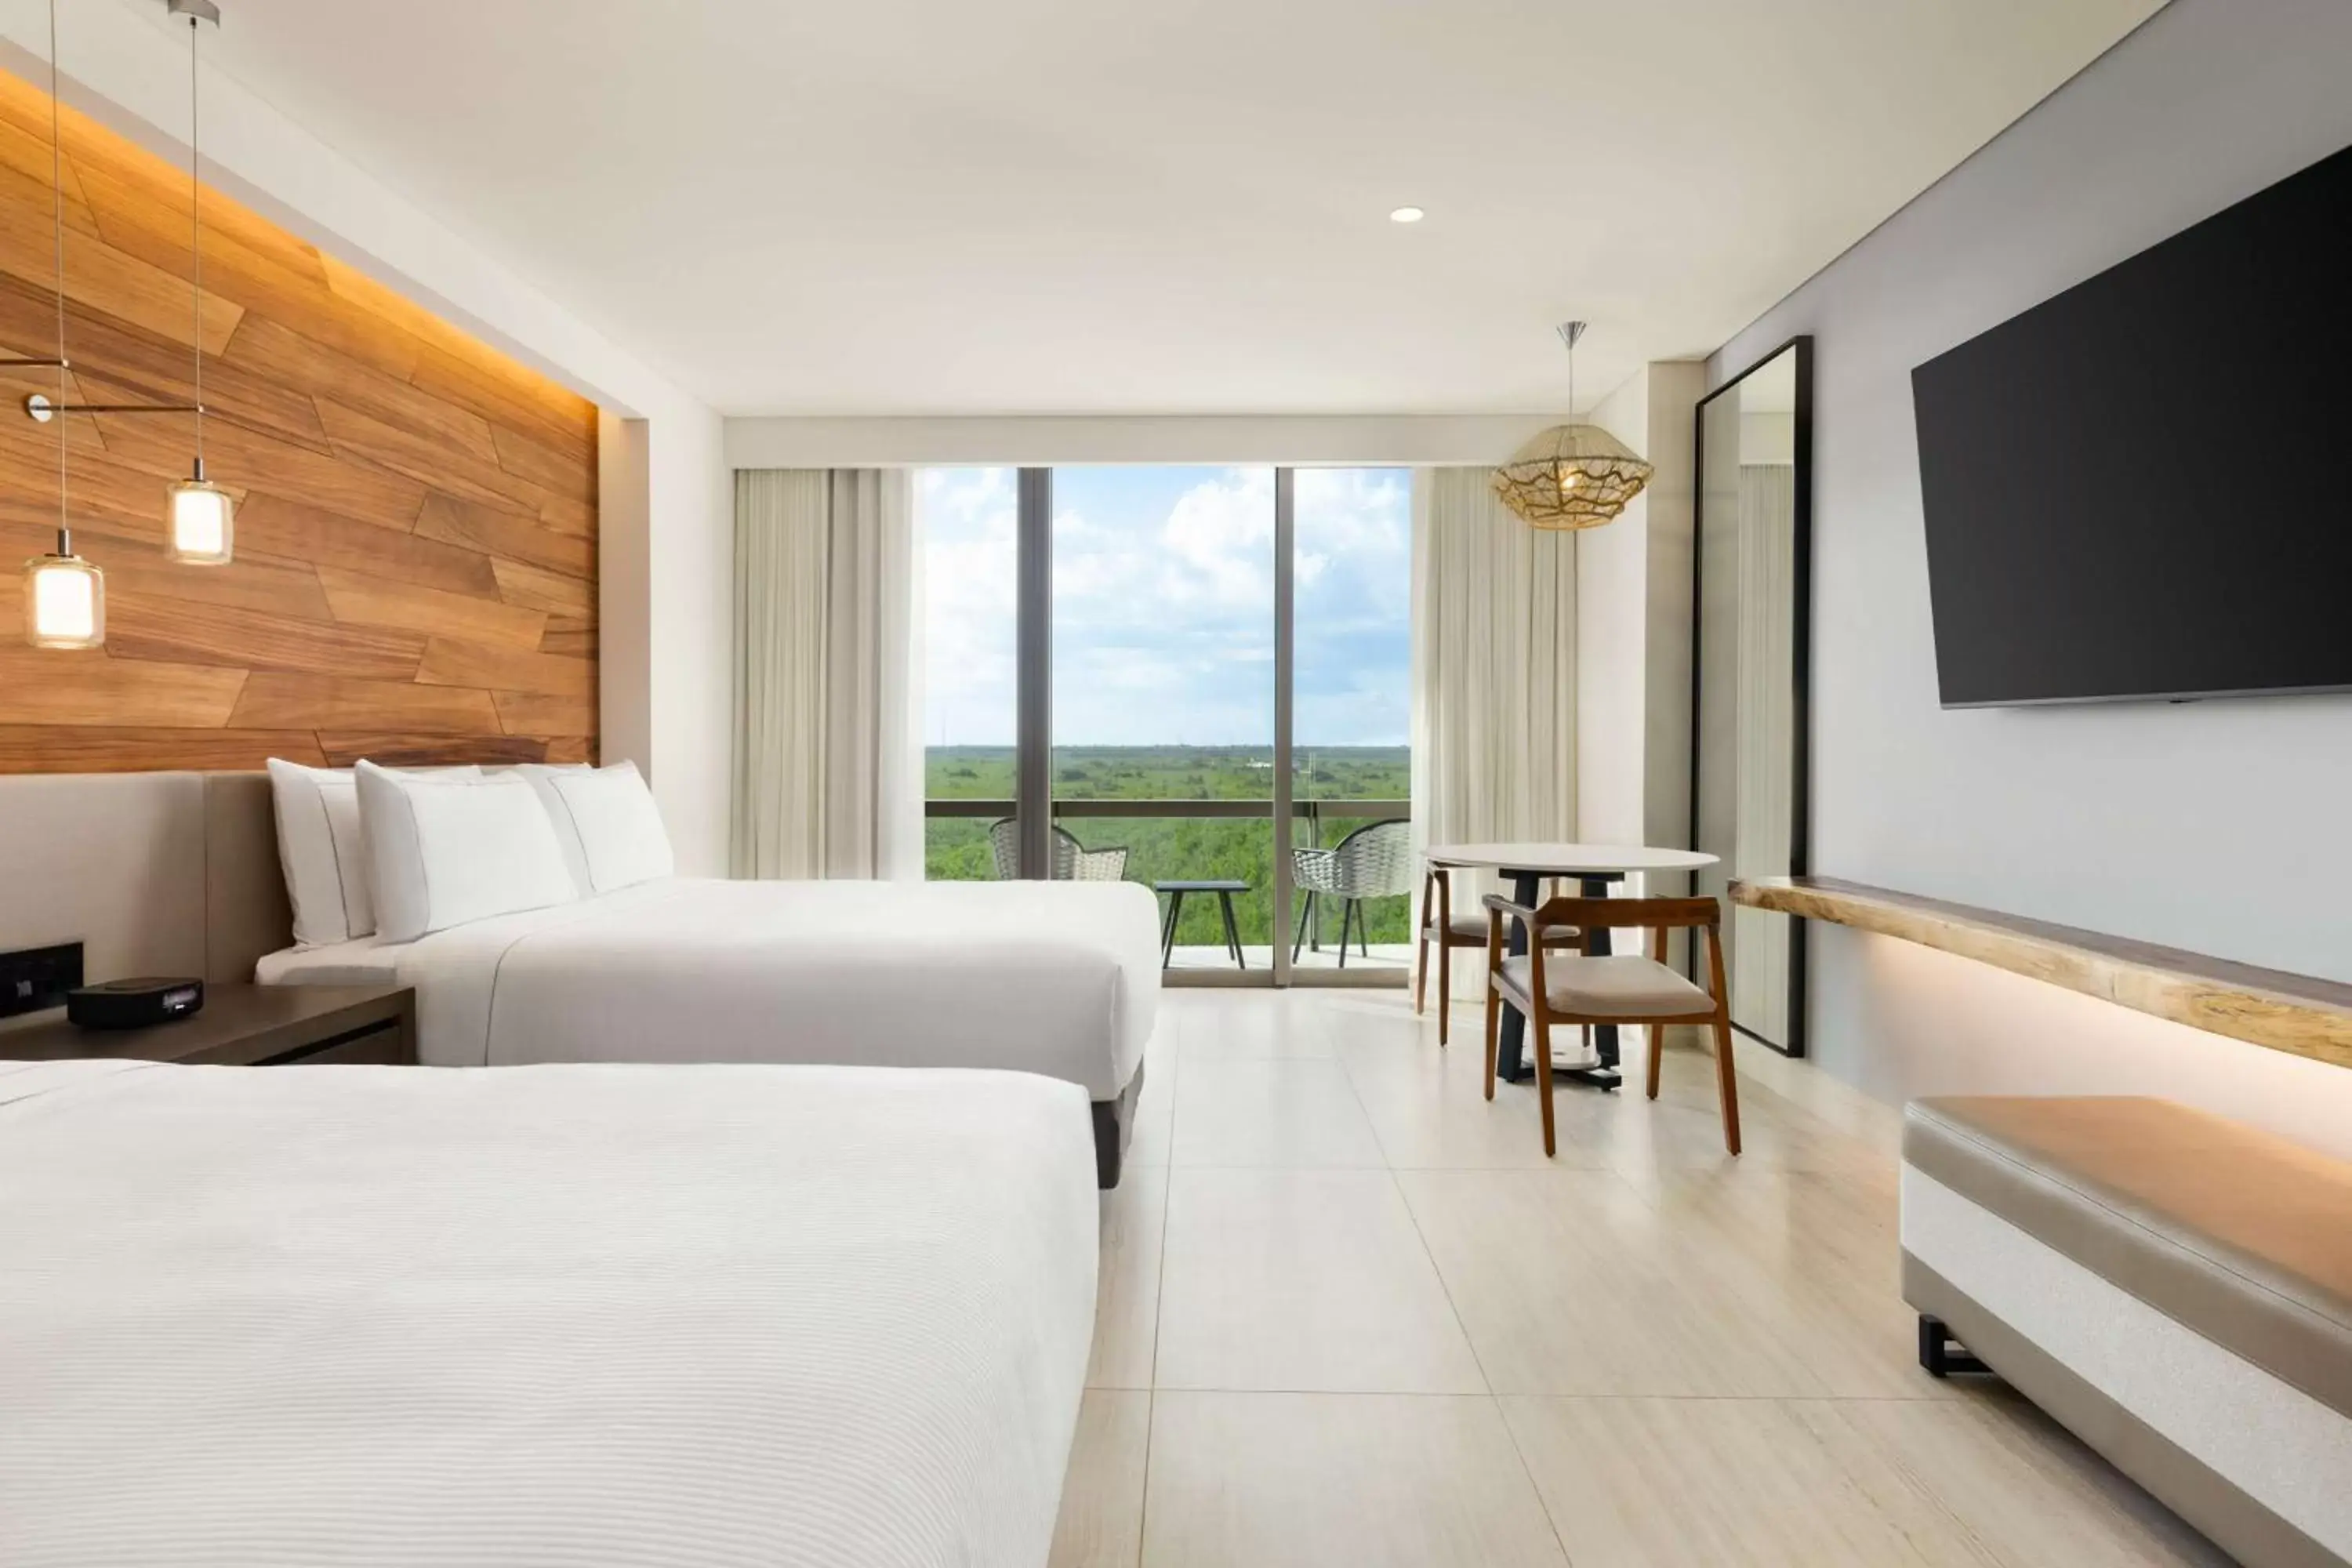 Bedroom in Hilton Cancun, an All-Inclusive Resort